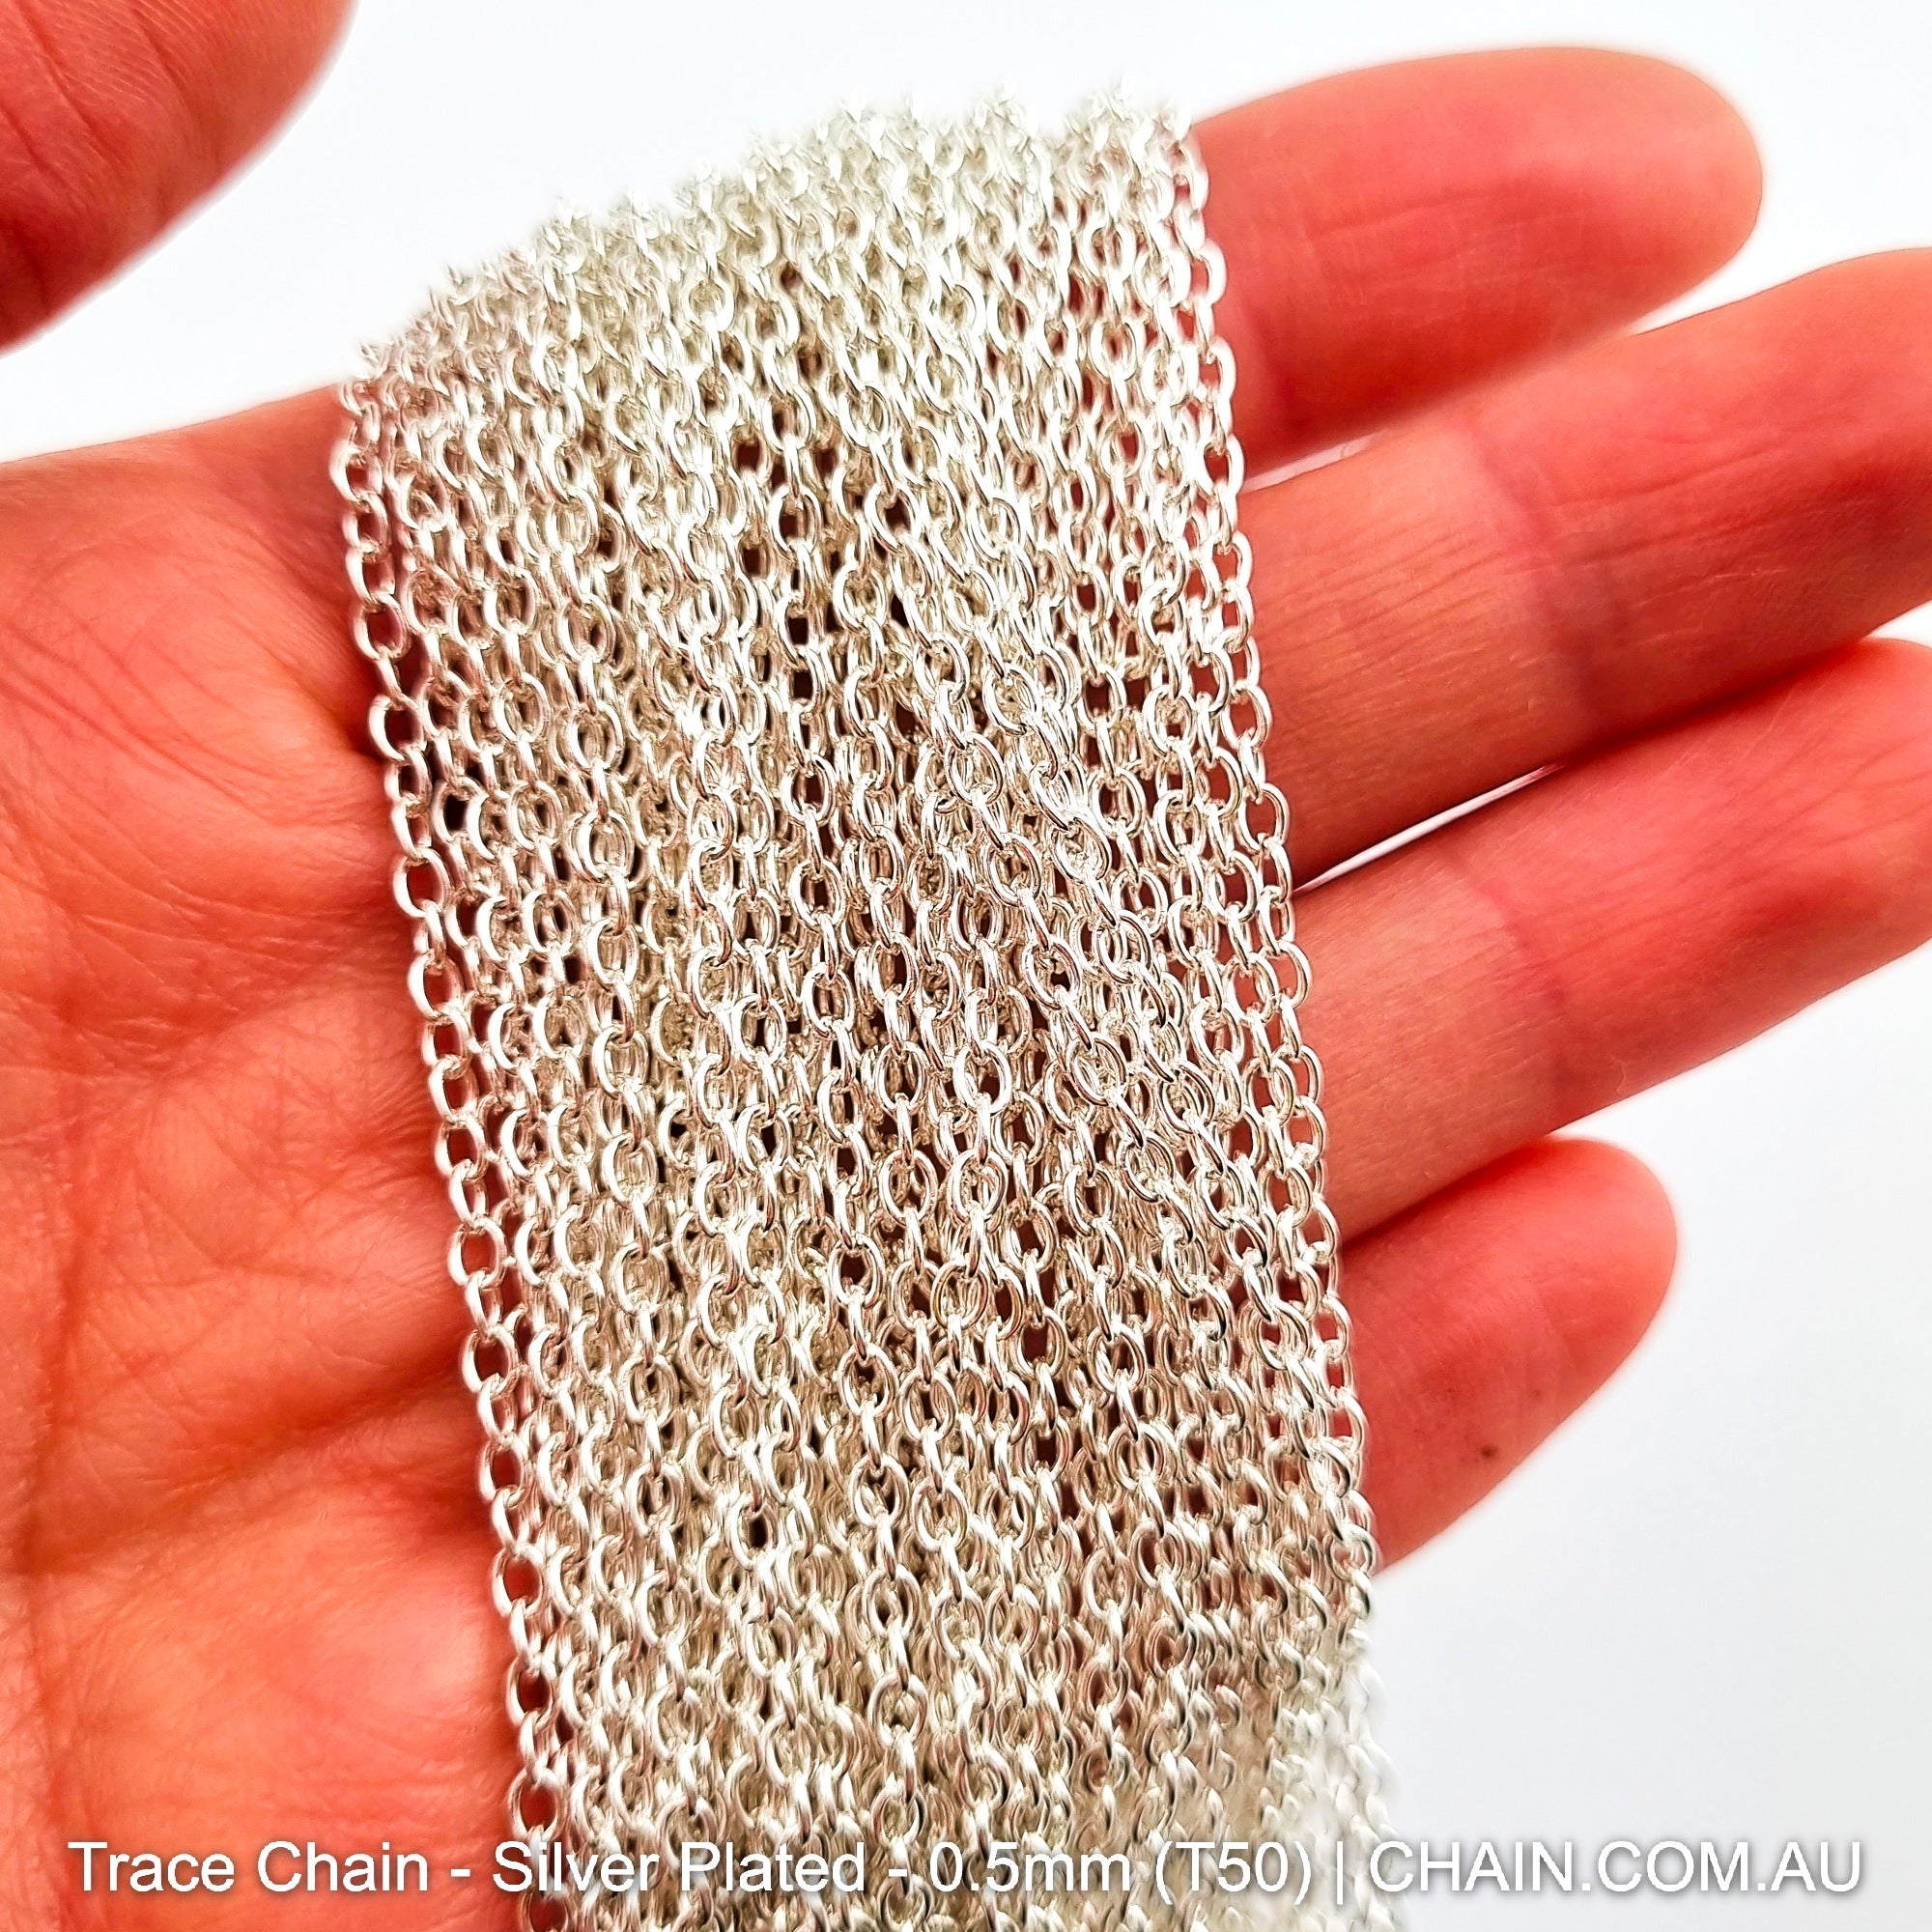 Trace Chain in a Silver Plated Finish. Size: 0.5mm, T50. Jewellery Chain, Australia wide shipping. Shop chain.com.au